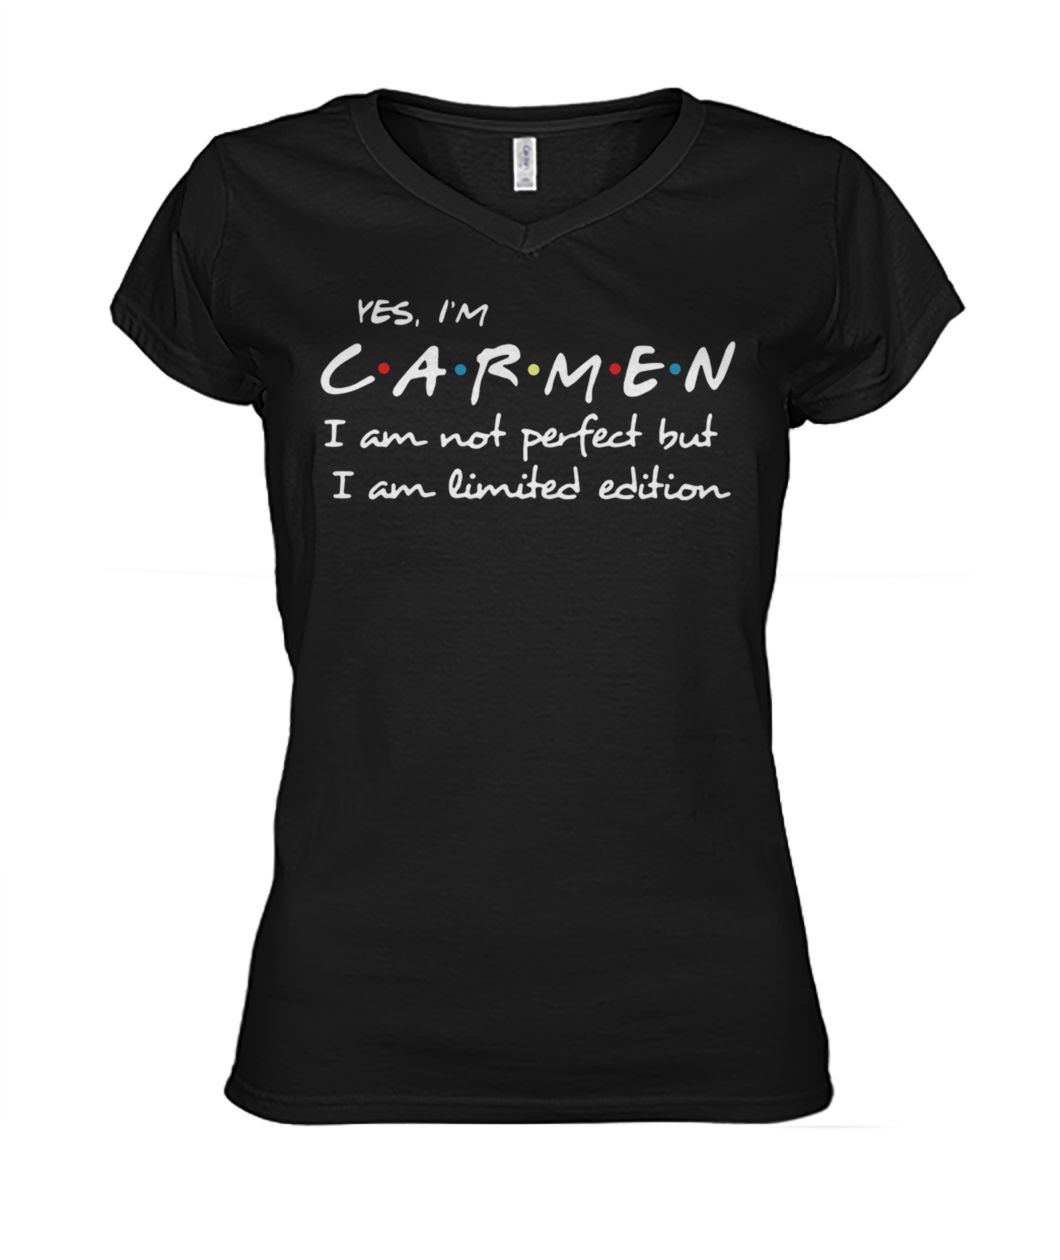 Yes I'm carmen I am not perfect but I am limited edition women's v-neck